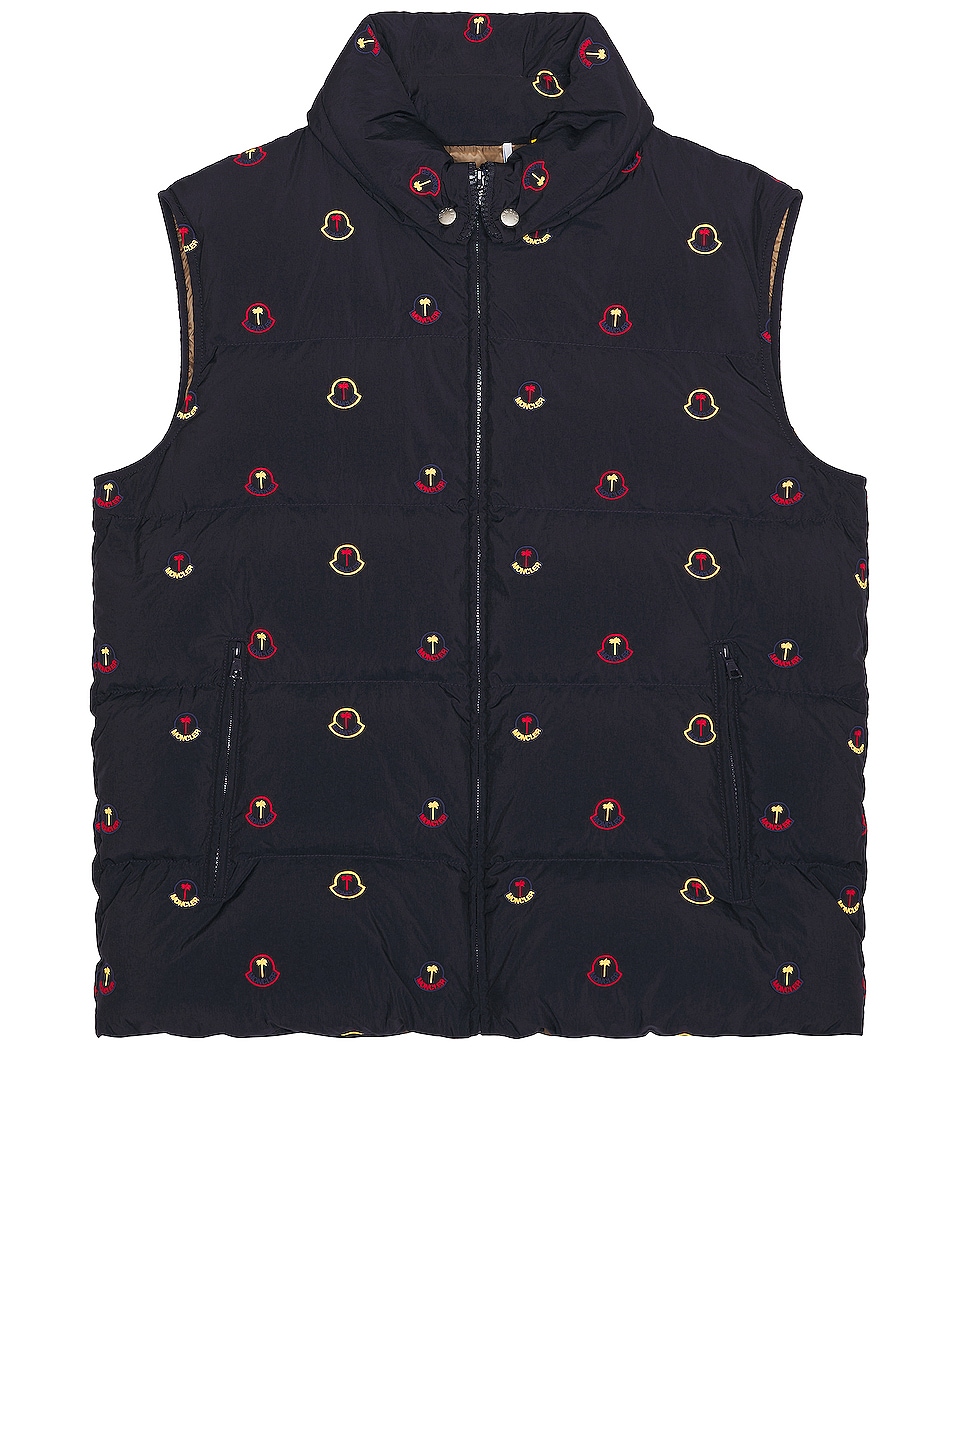 Image 1 of Moncler Genius x Palm Angels Henon Vest in Navy